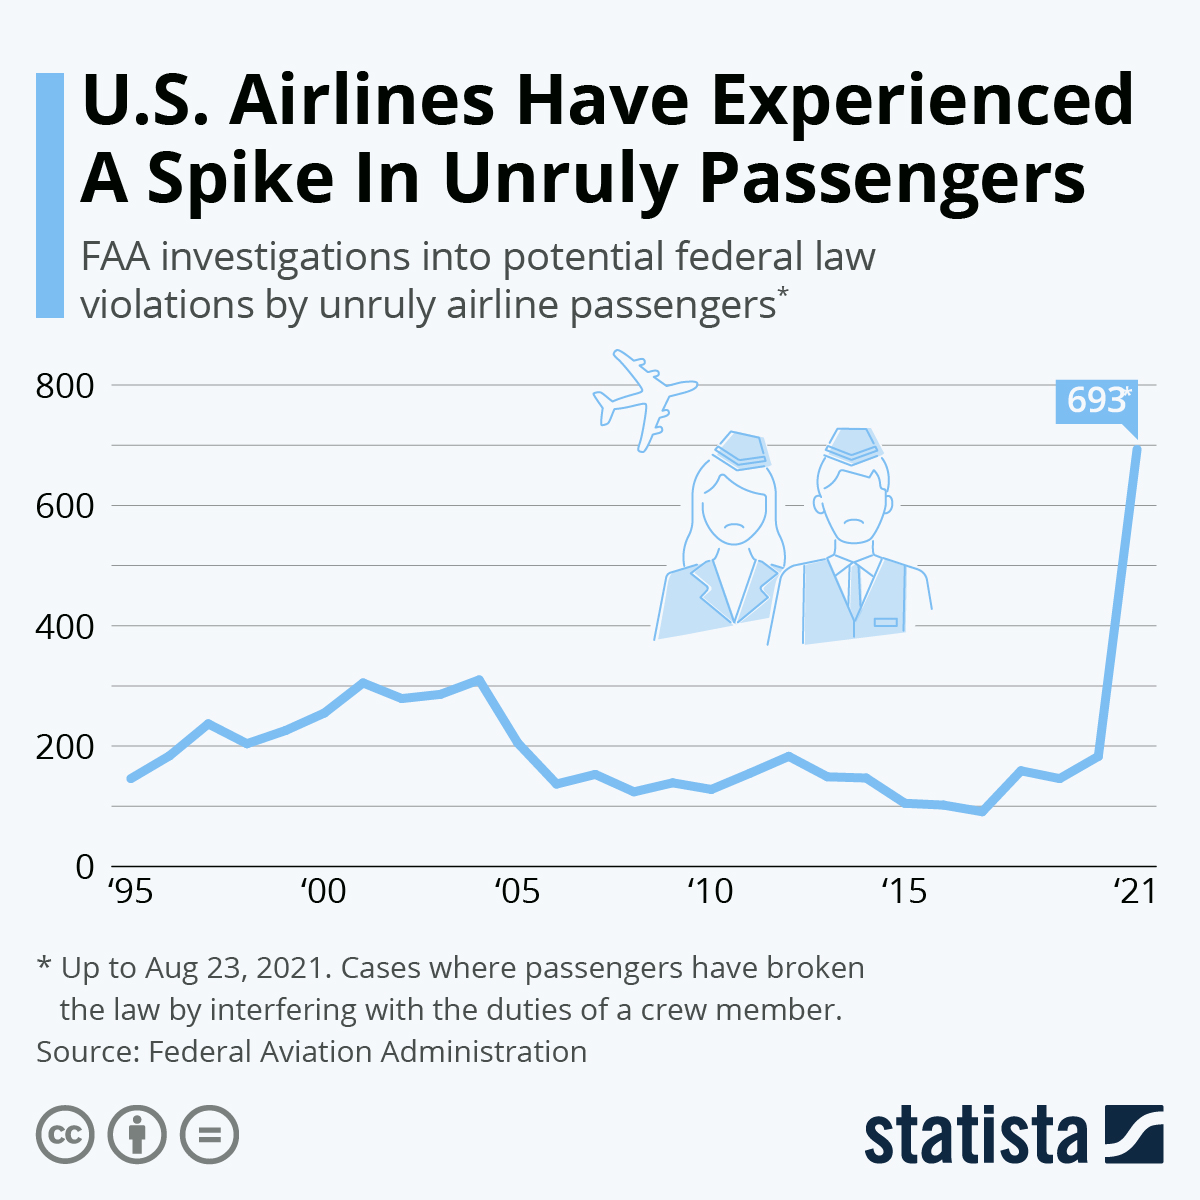 U.S. Airlines Have Experienced A Spike In Unruly Passengers